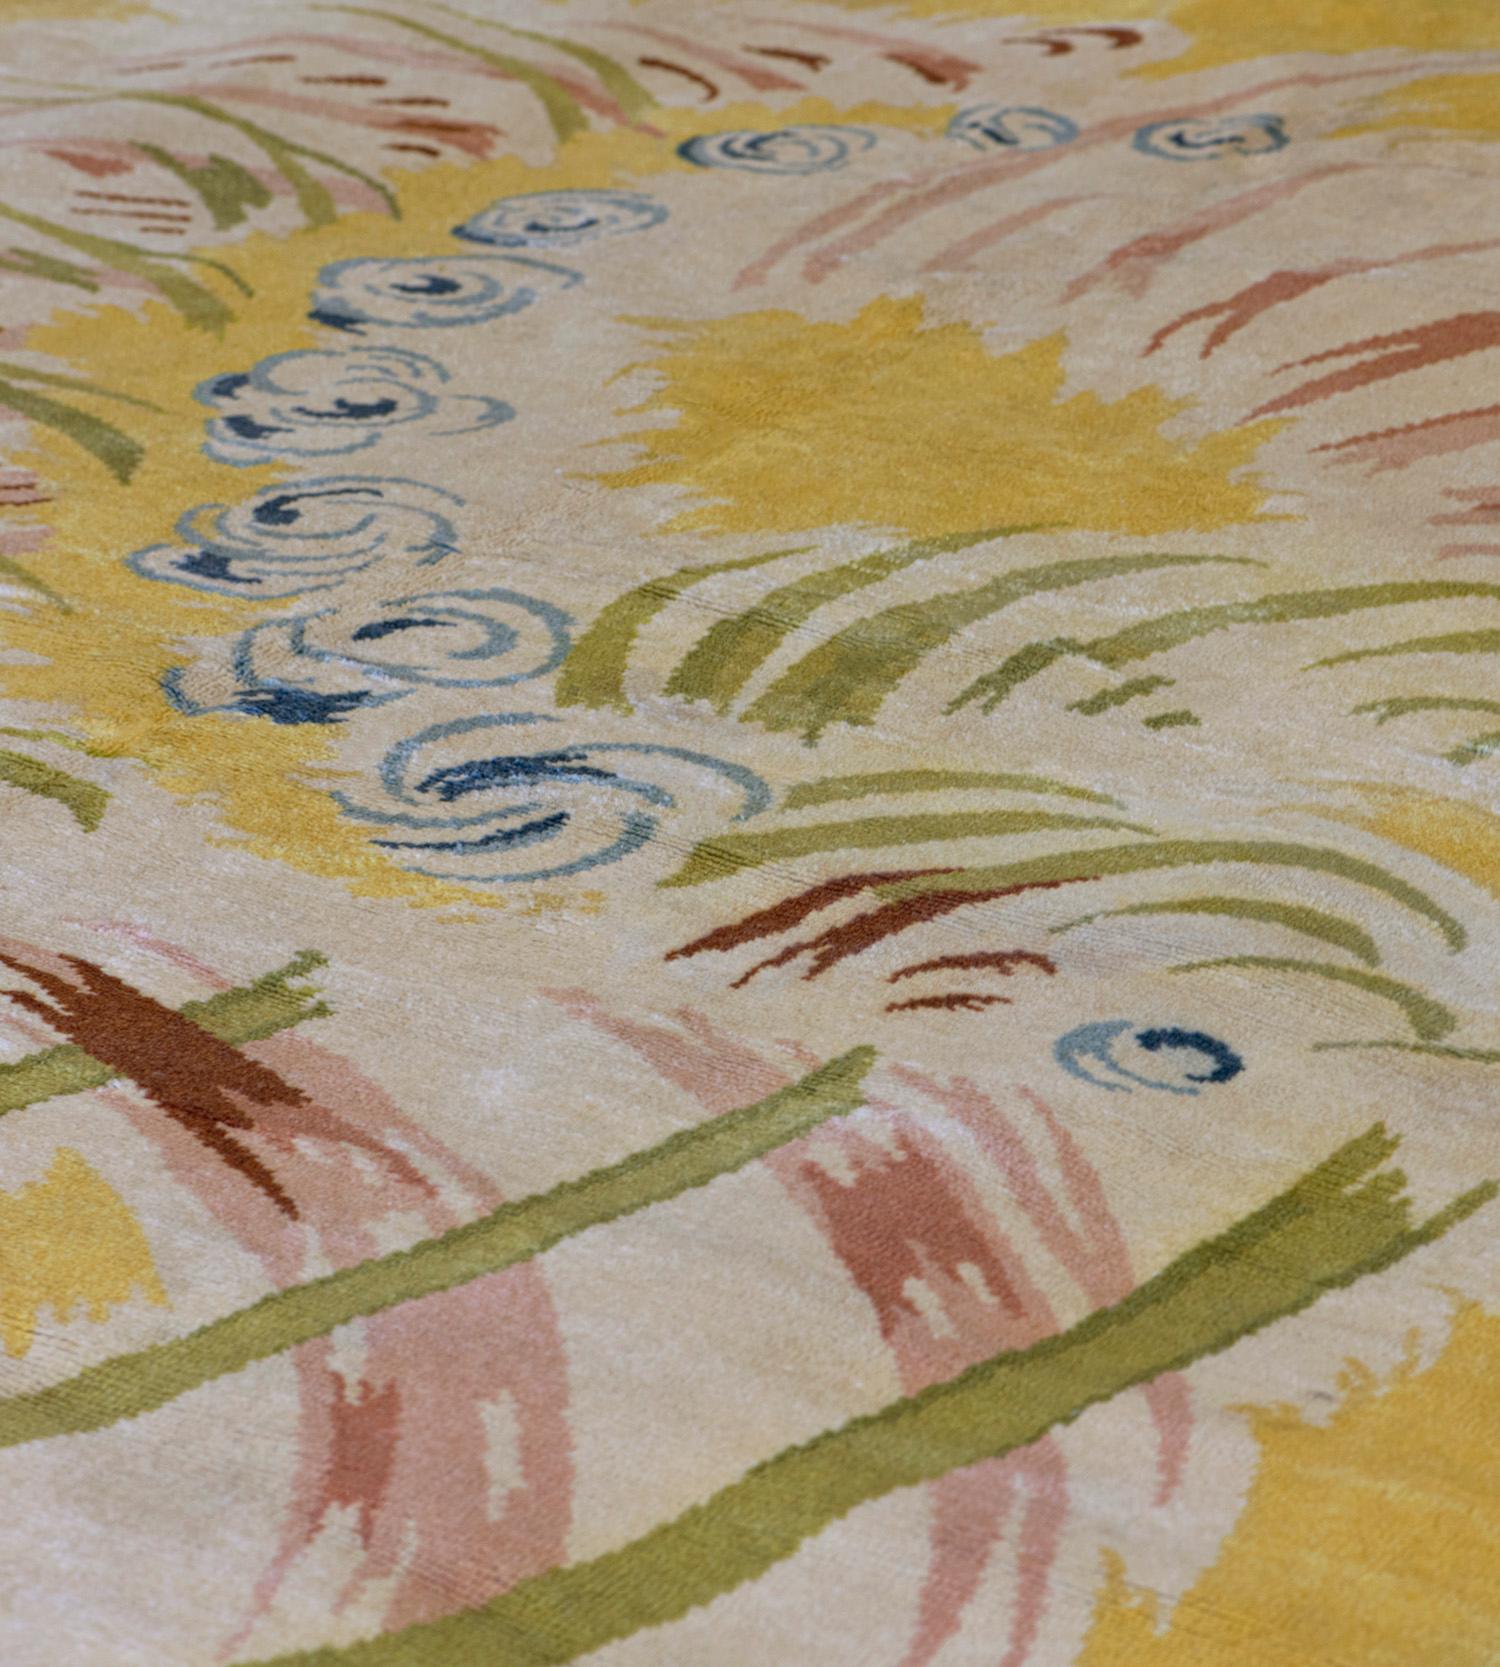 This traditional handwoven French deco rug has an ivory field with broad sweeping strokes suggesting clouds and abstract motif, in a loose golden saffron border. 

In the rug trade, the term “Deco” applies to European and some Chinese rugs that